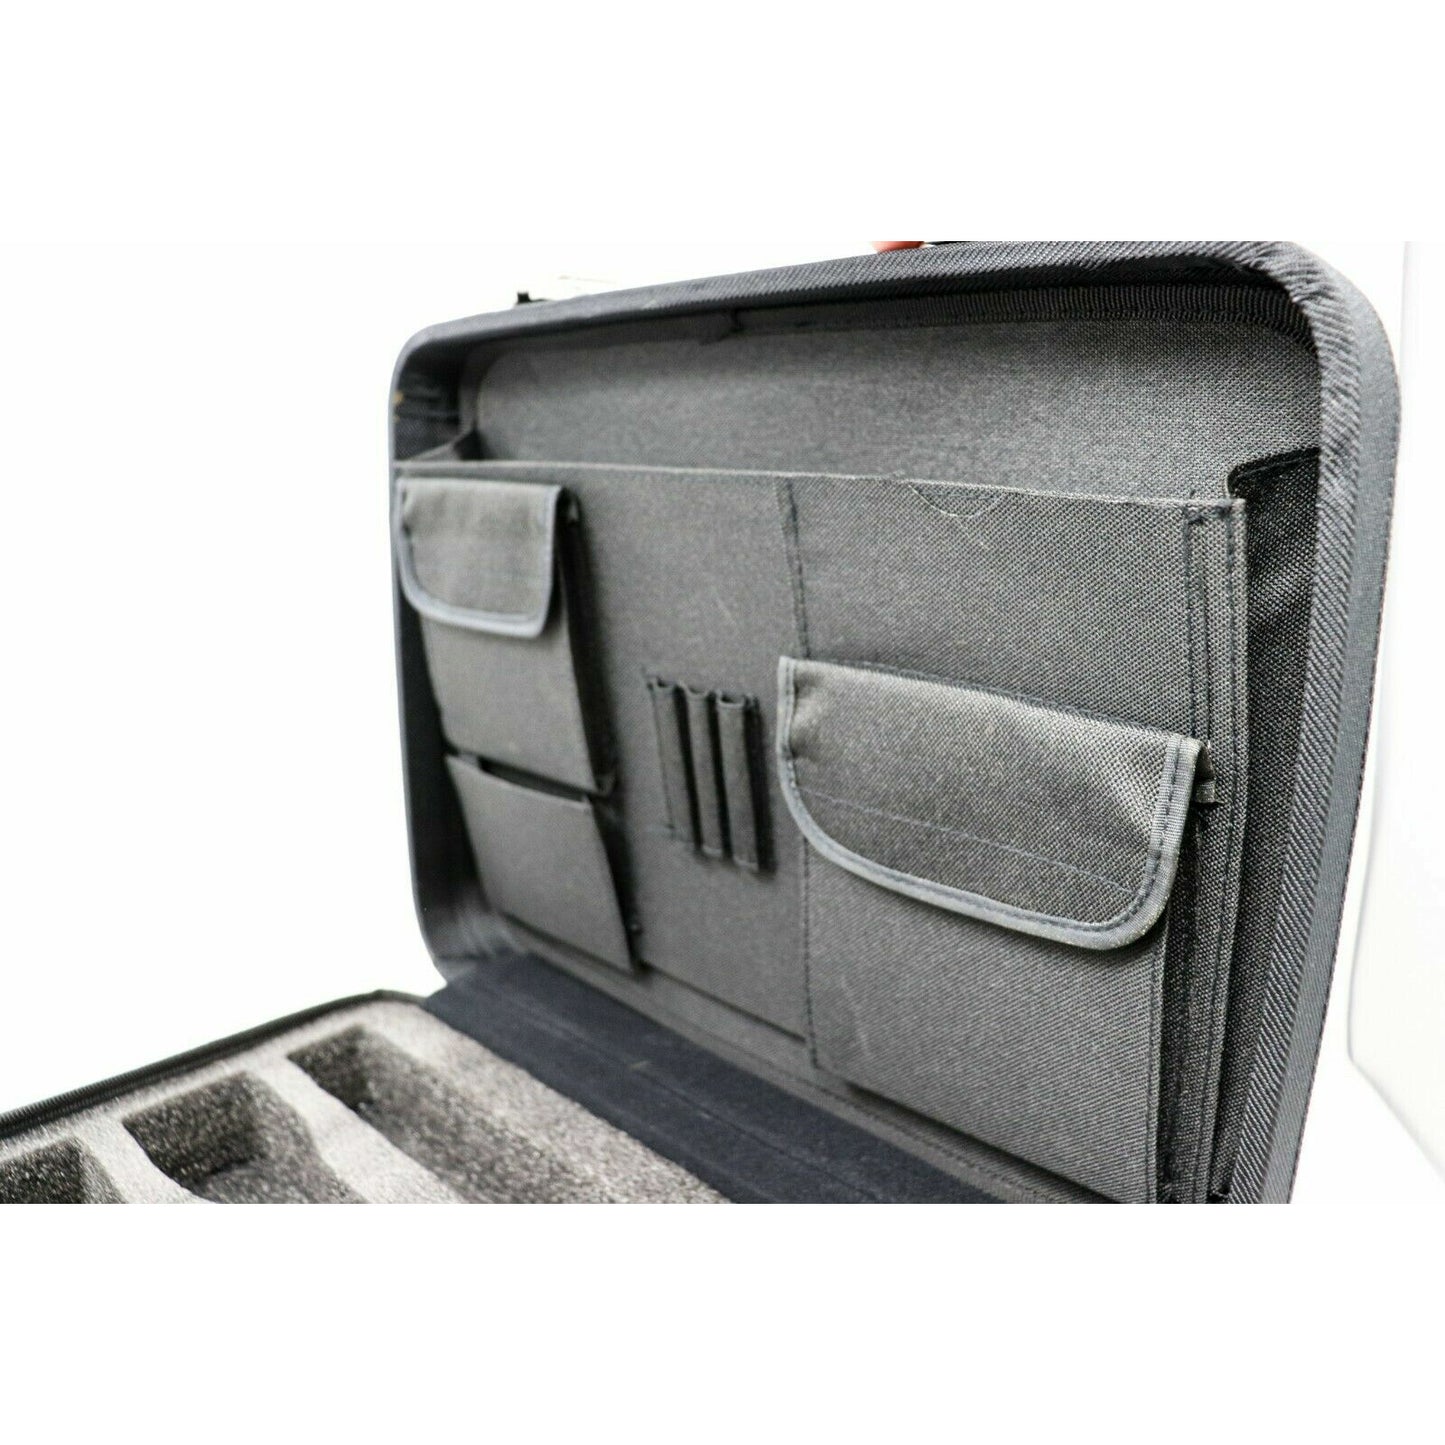 4 Microphone Carrying Case Mic Instrument Storage Portable Flight Box